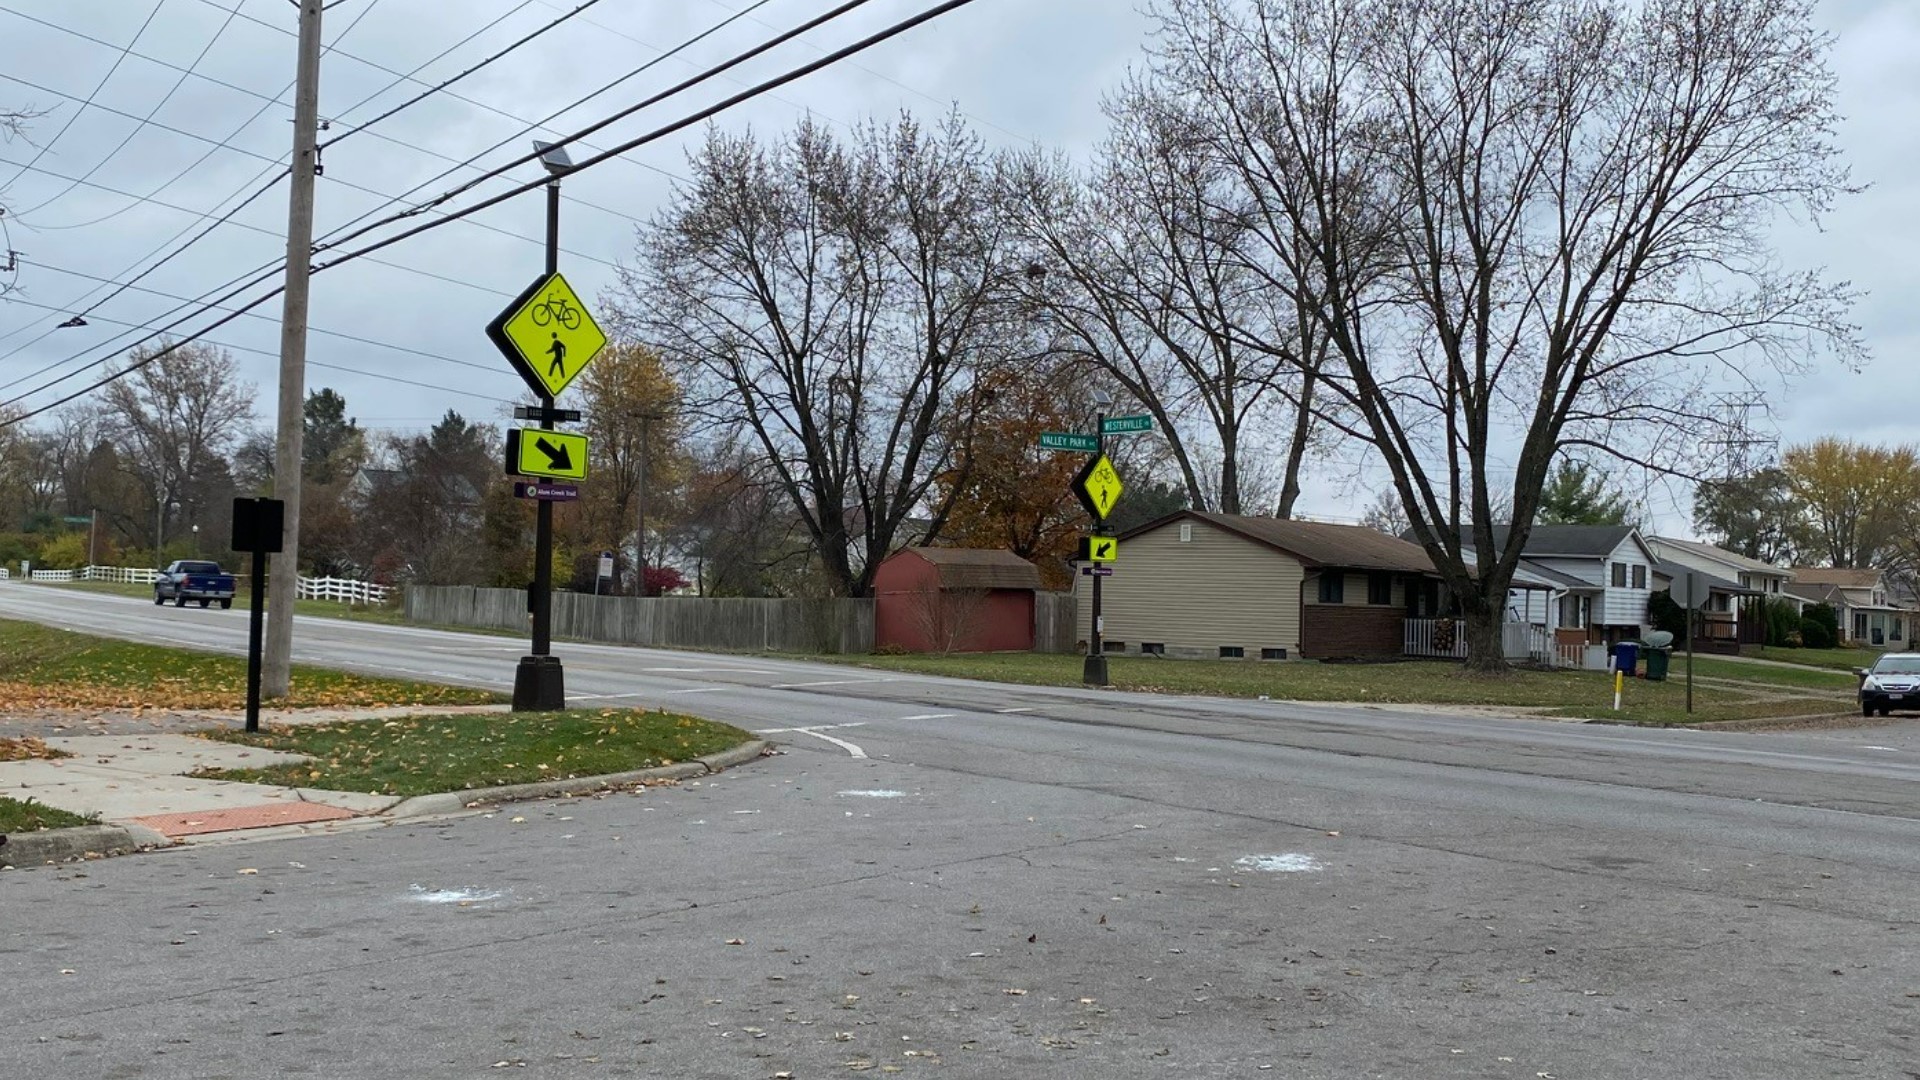 One neighbor says she raised concerns about a now deadly crosswalk years ago.